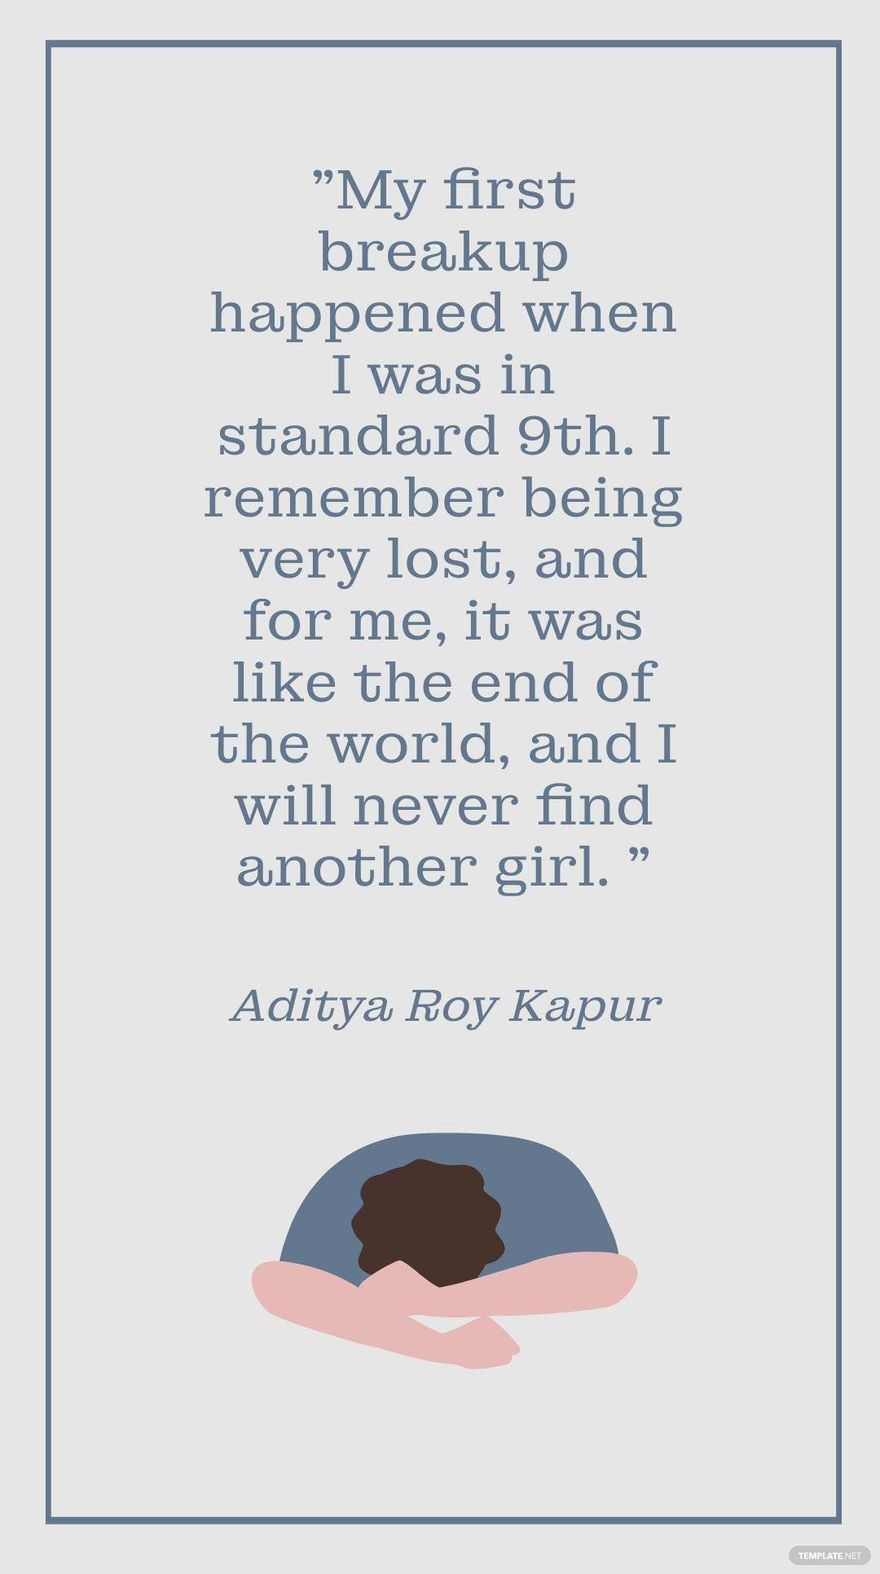 Free Aditya Roy Kapur - My first breakup happened when I was in standard 9th. I remember being very lost, and for me, it was like the end of the world, and I will never find another girl. in JPG